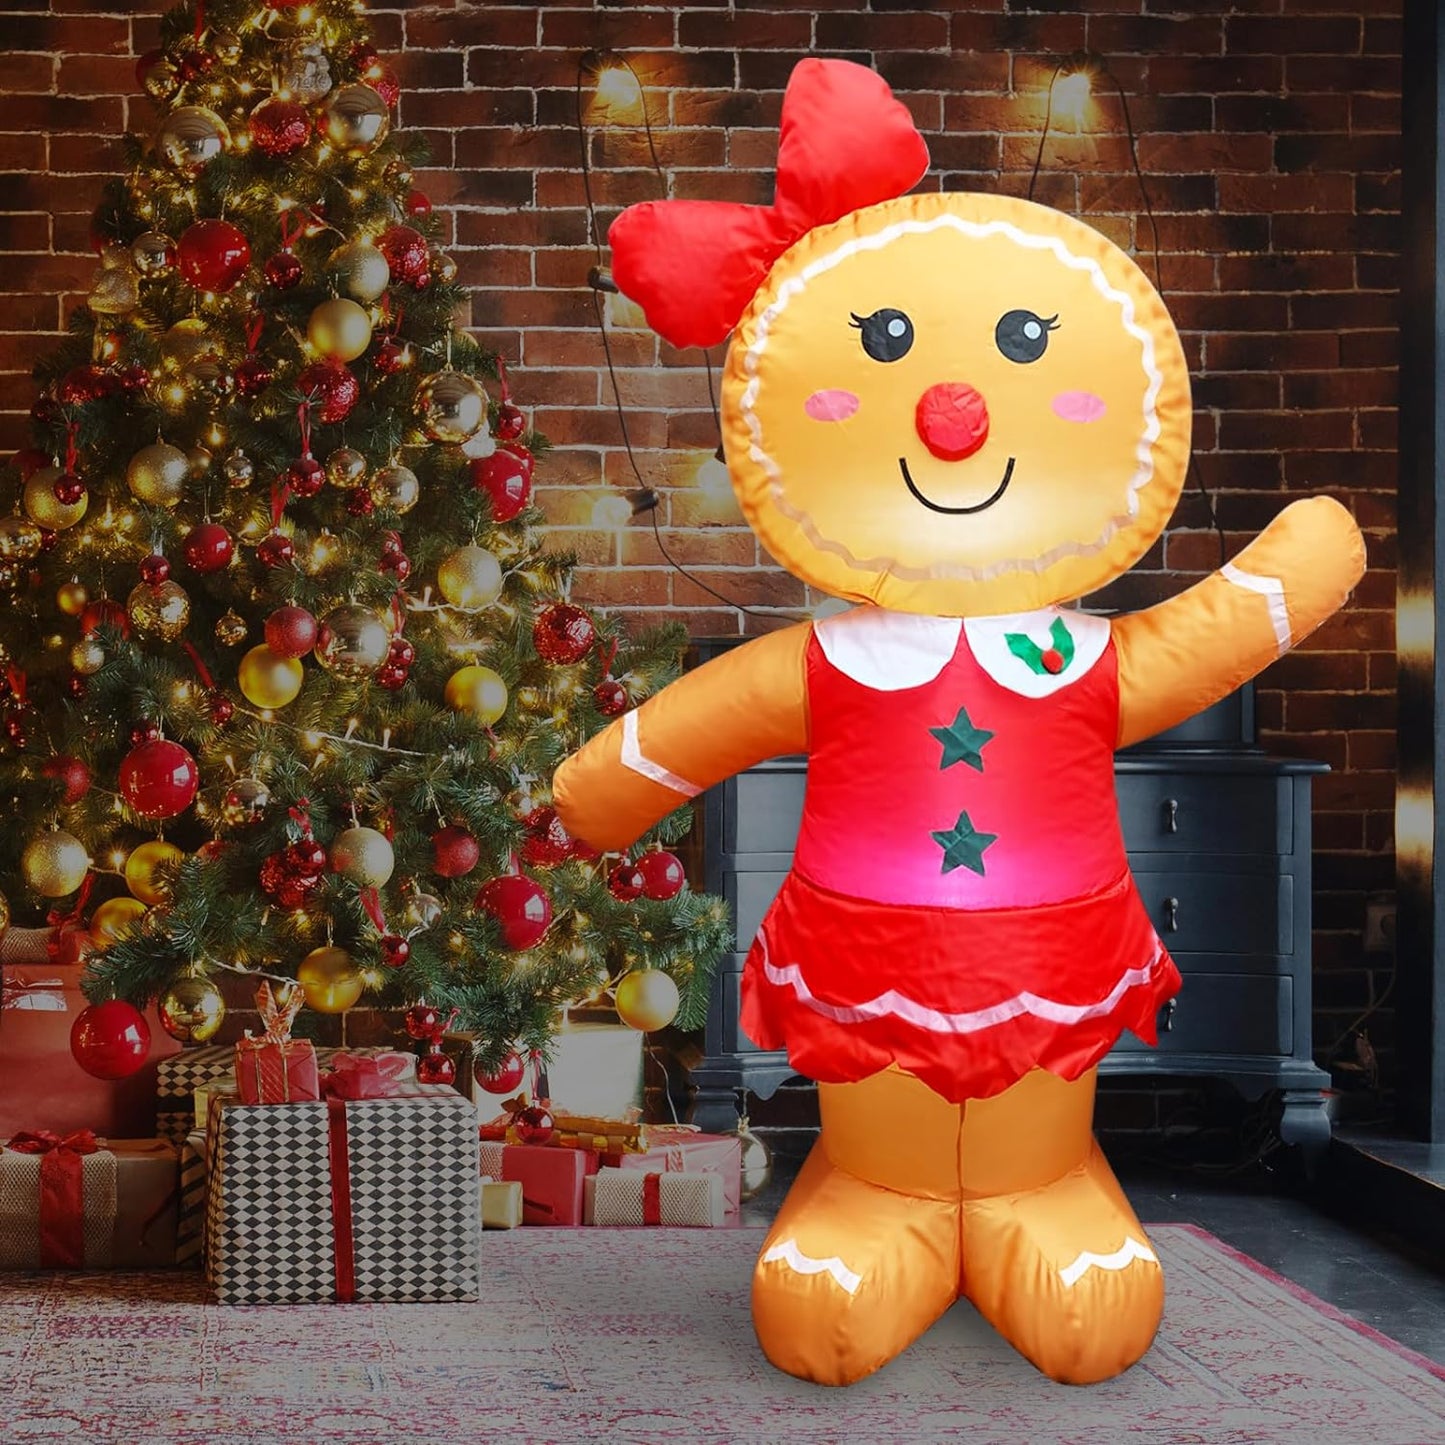 Sunlit 4.5FT Lighted Gingerbread Girl Inflatable Yard Decoration with Blower and Adaptor for Festive Indoor Porch Outdoor Decor